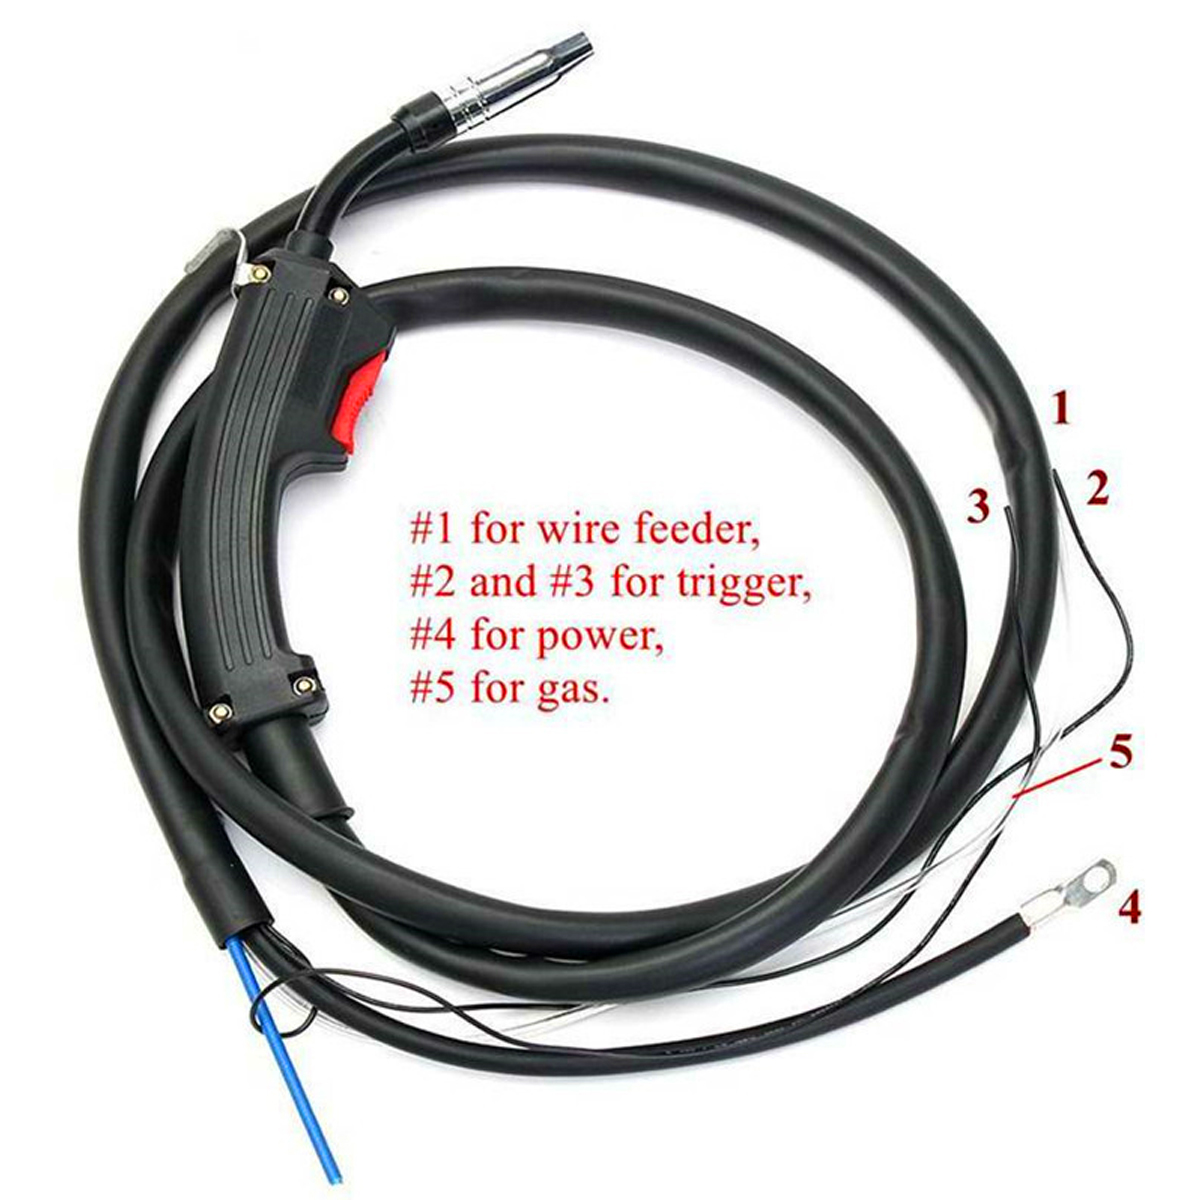 Practical-Gas-Welding-Torch-Air-Cooled-Welding-Torch-Replacement-For-MIG-MAG-Welding-Machine-1762073-2